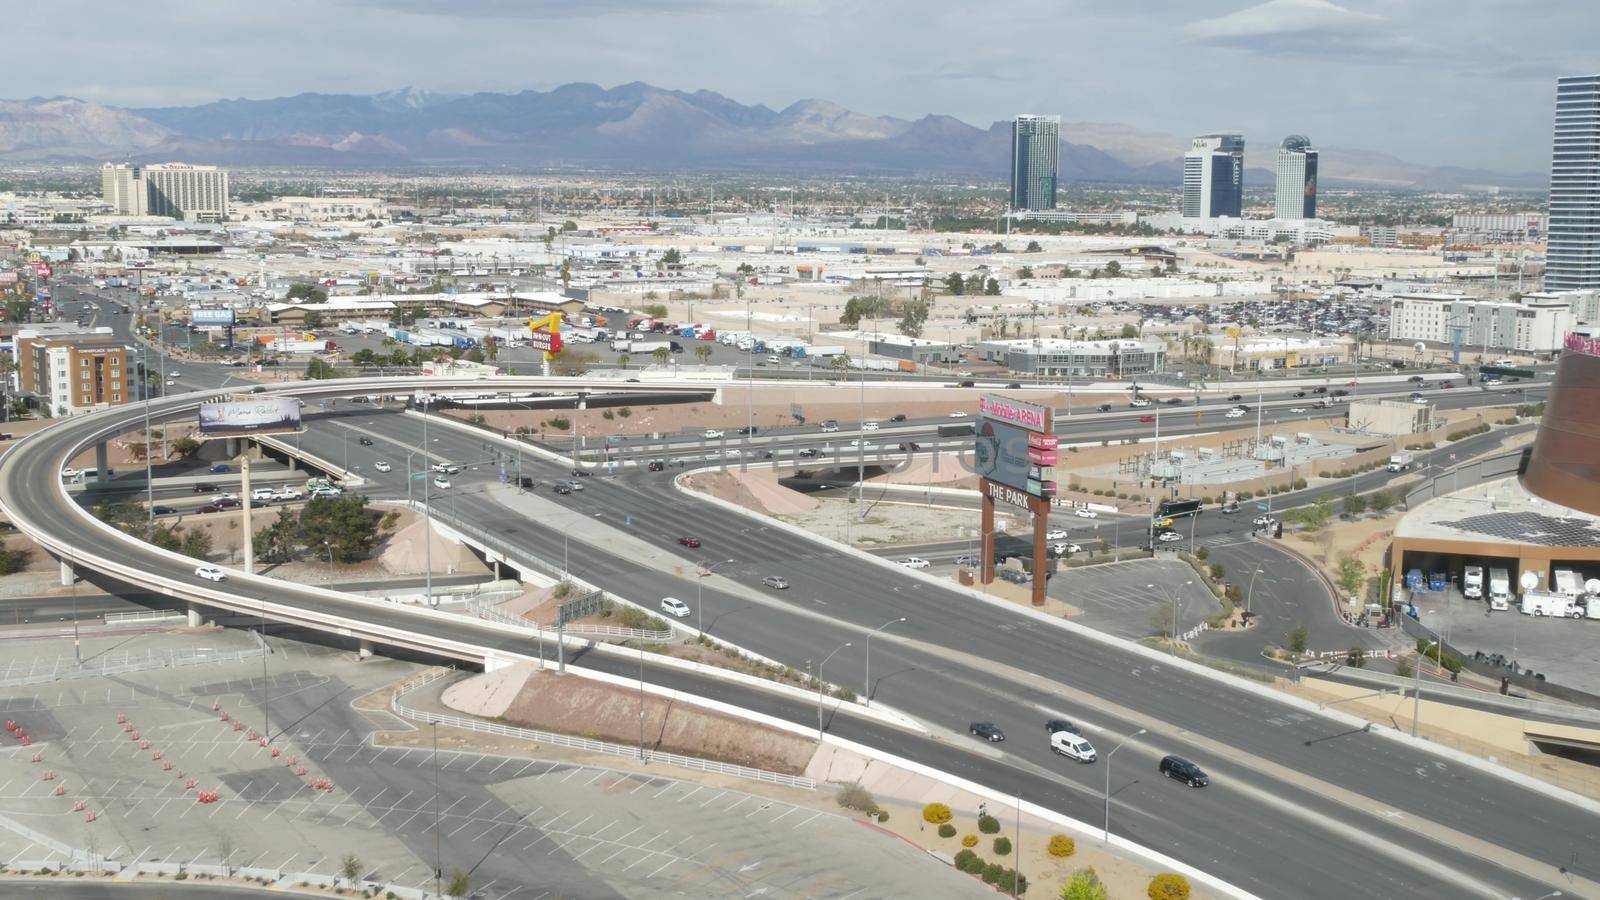 LAS VEGAS, NEVADA USA - 7 MAR 2020: Sin city in Mojave desert from above. Traffic highway in valley with arid climate. Aerial view of road in tourist metropolis. Gambling and betting area with casino by DogoraSun